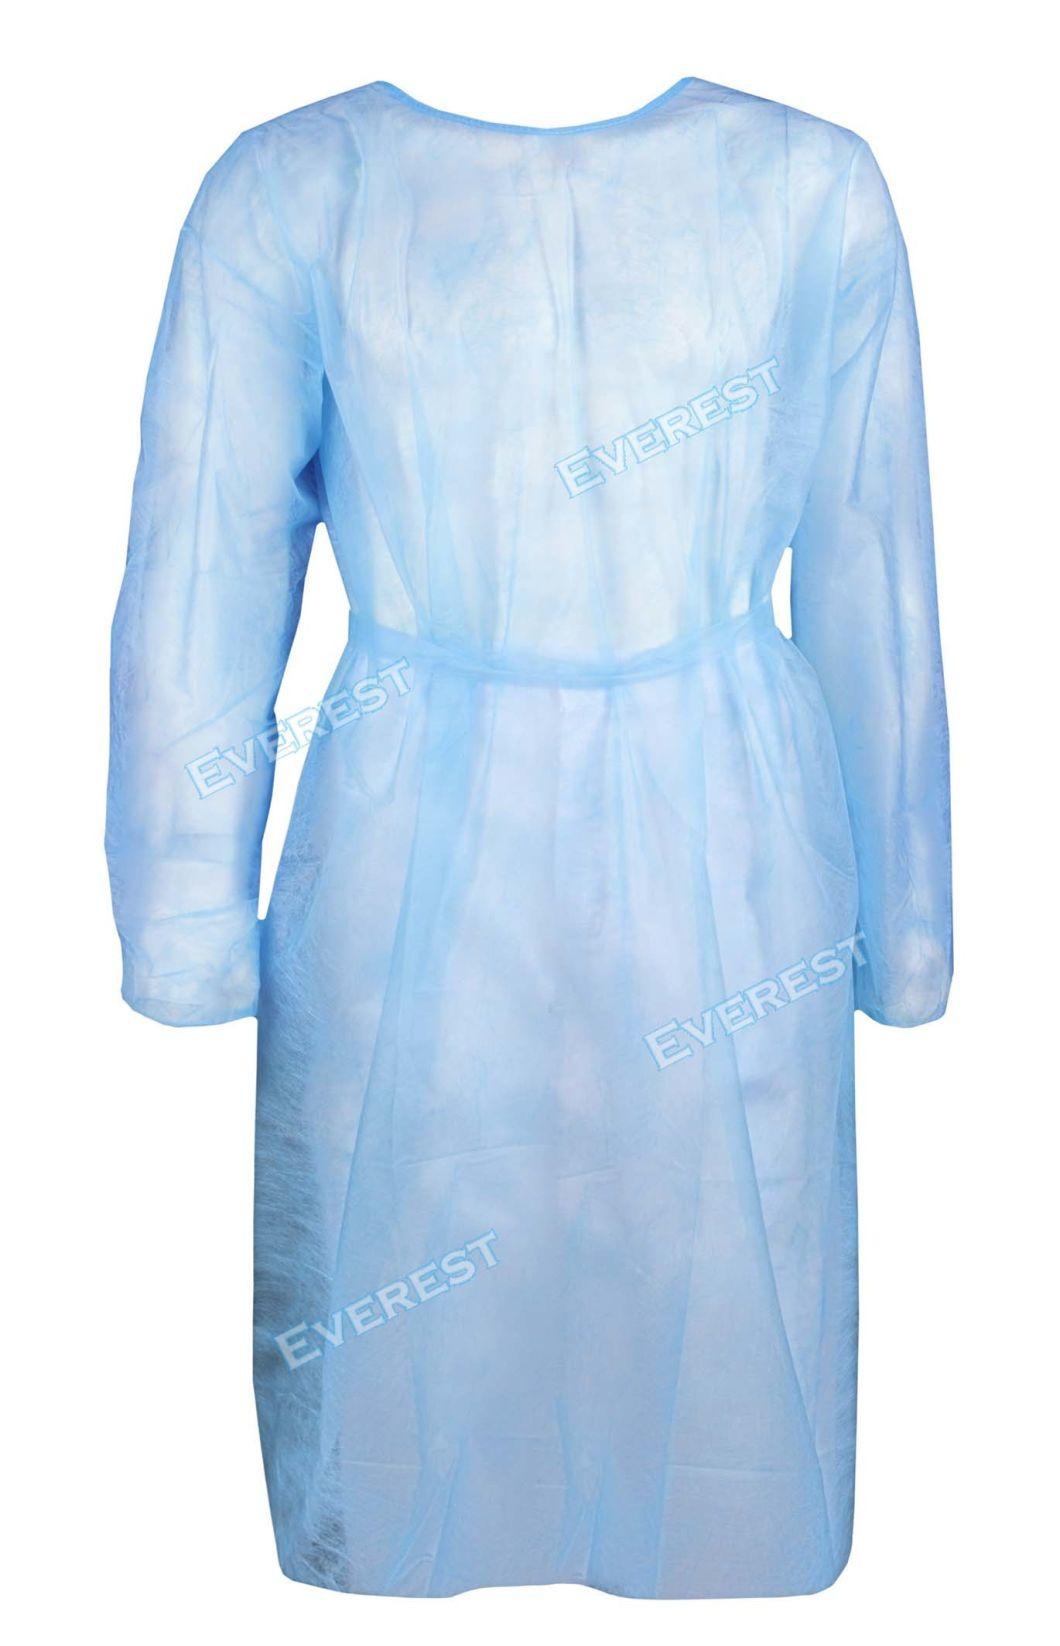 Disposable Patient Gowns with Knitted Cuff